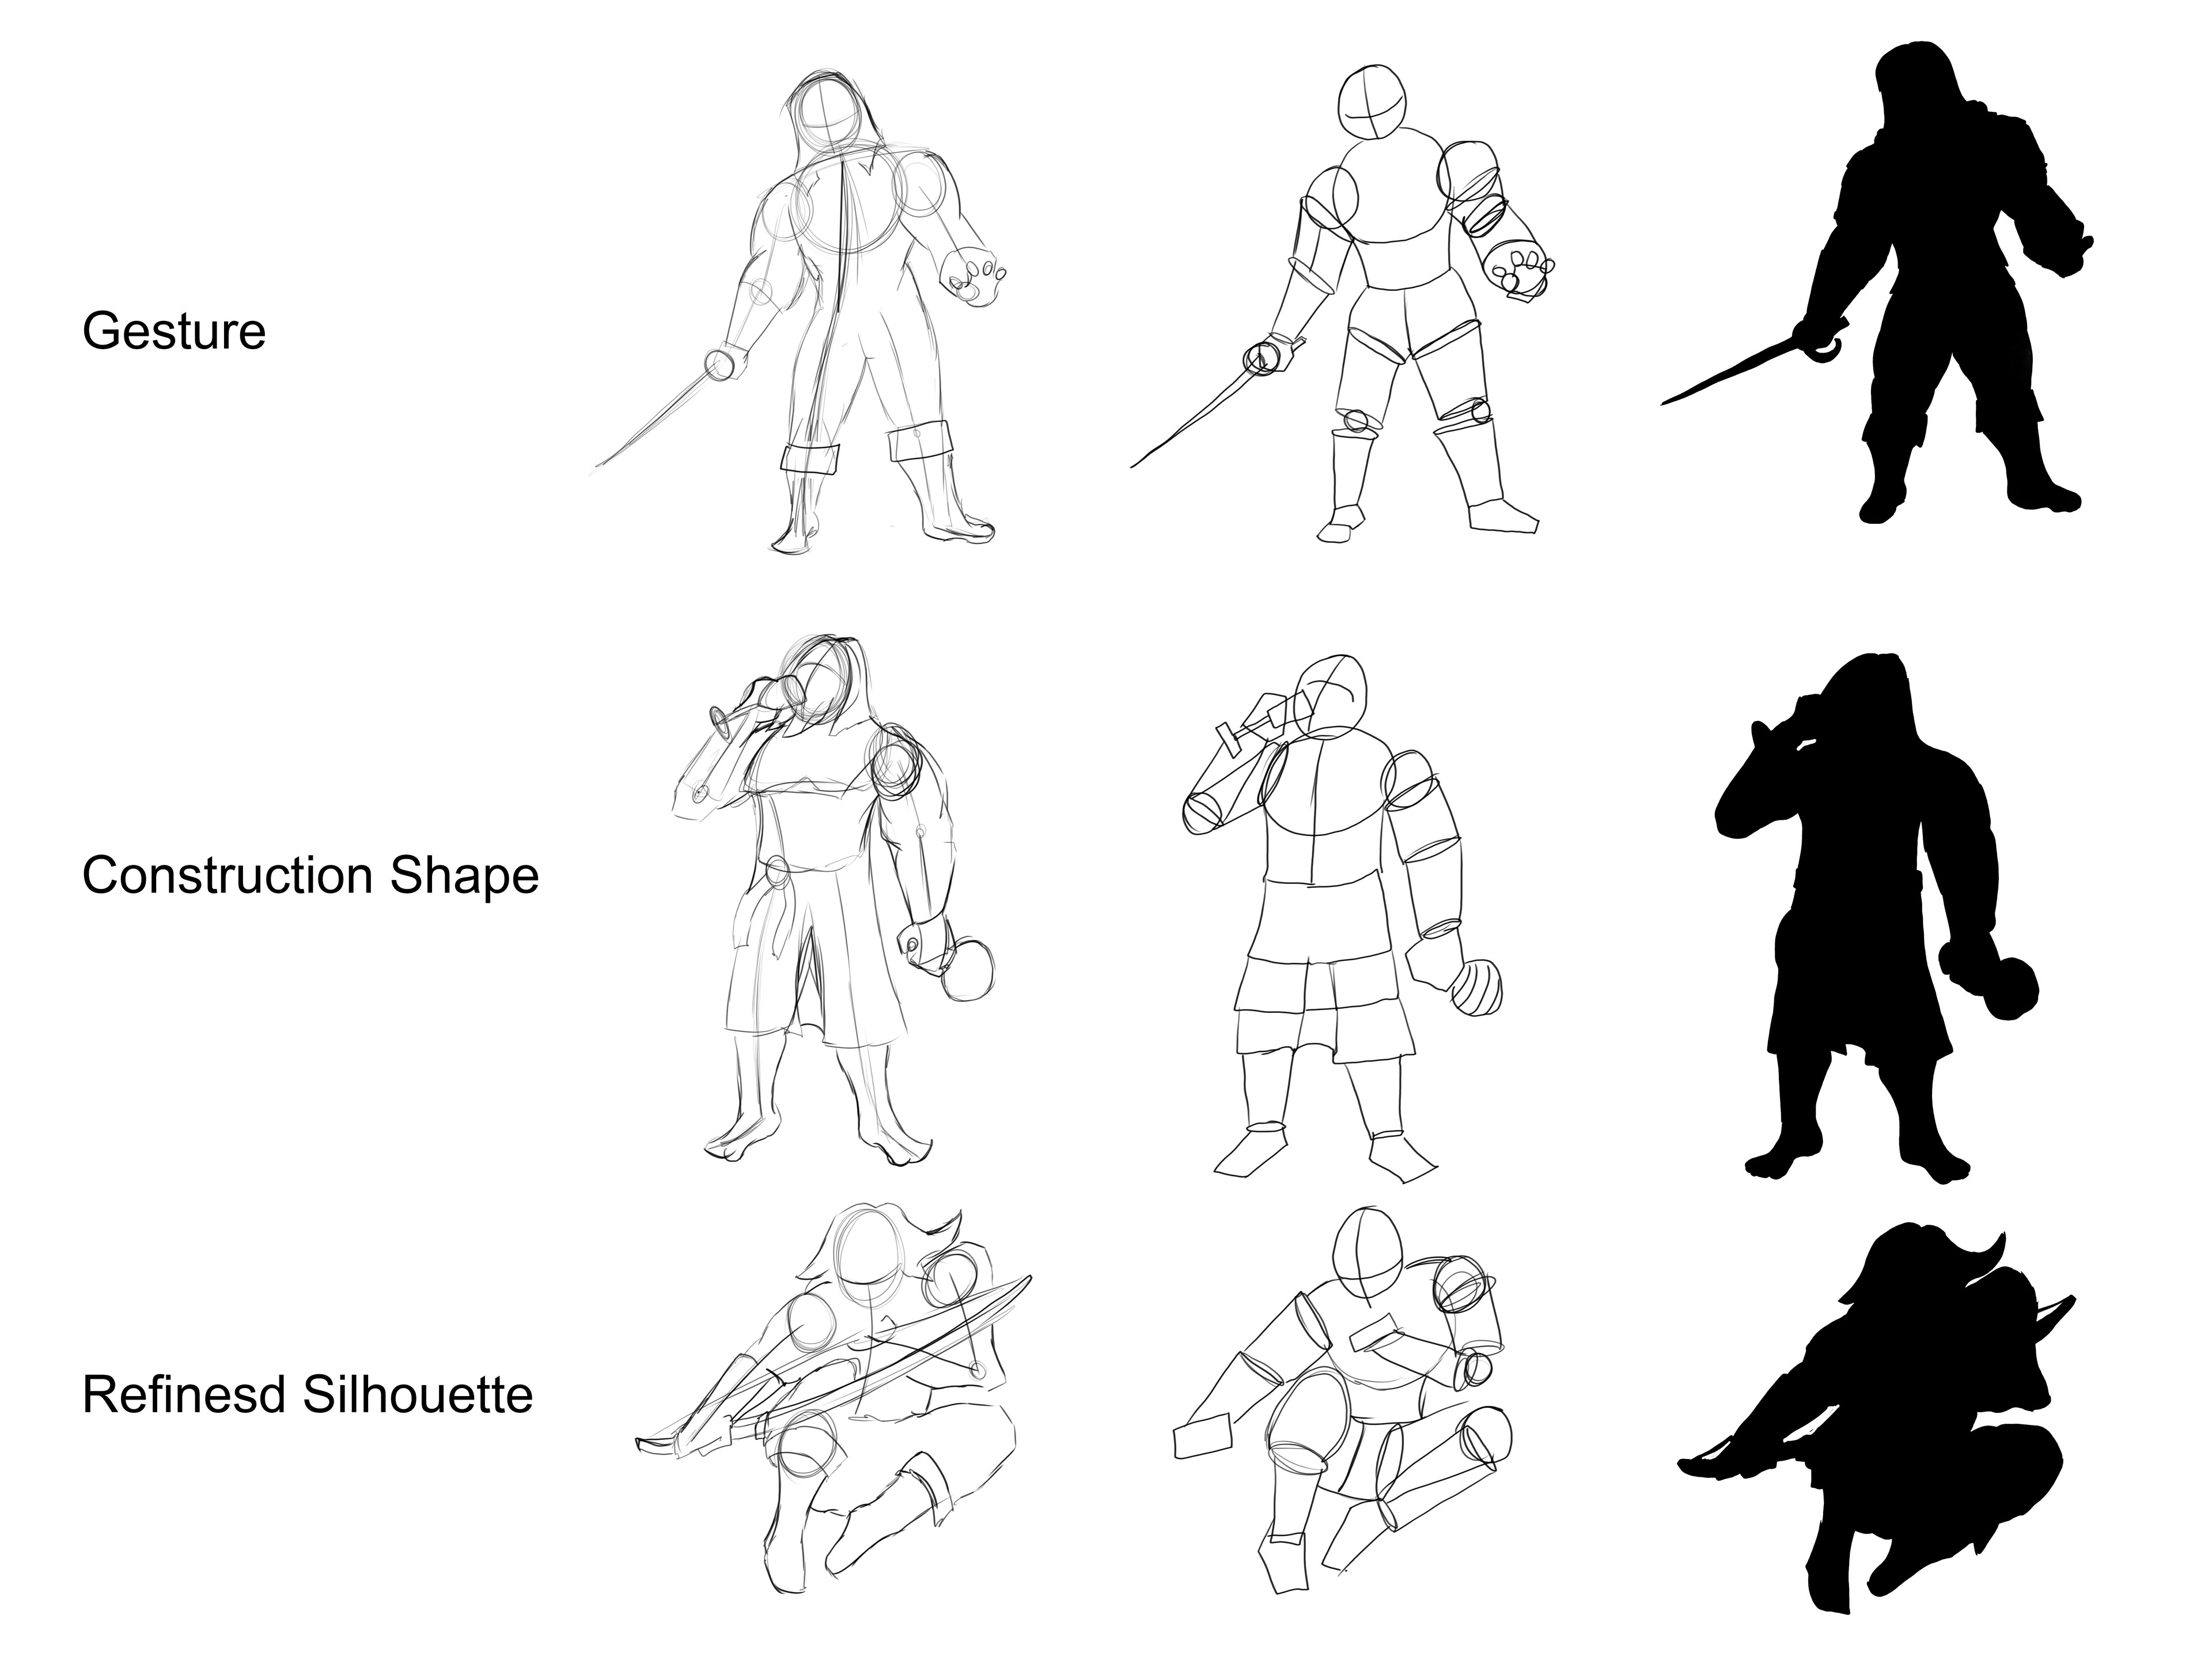 Action Poses